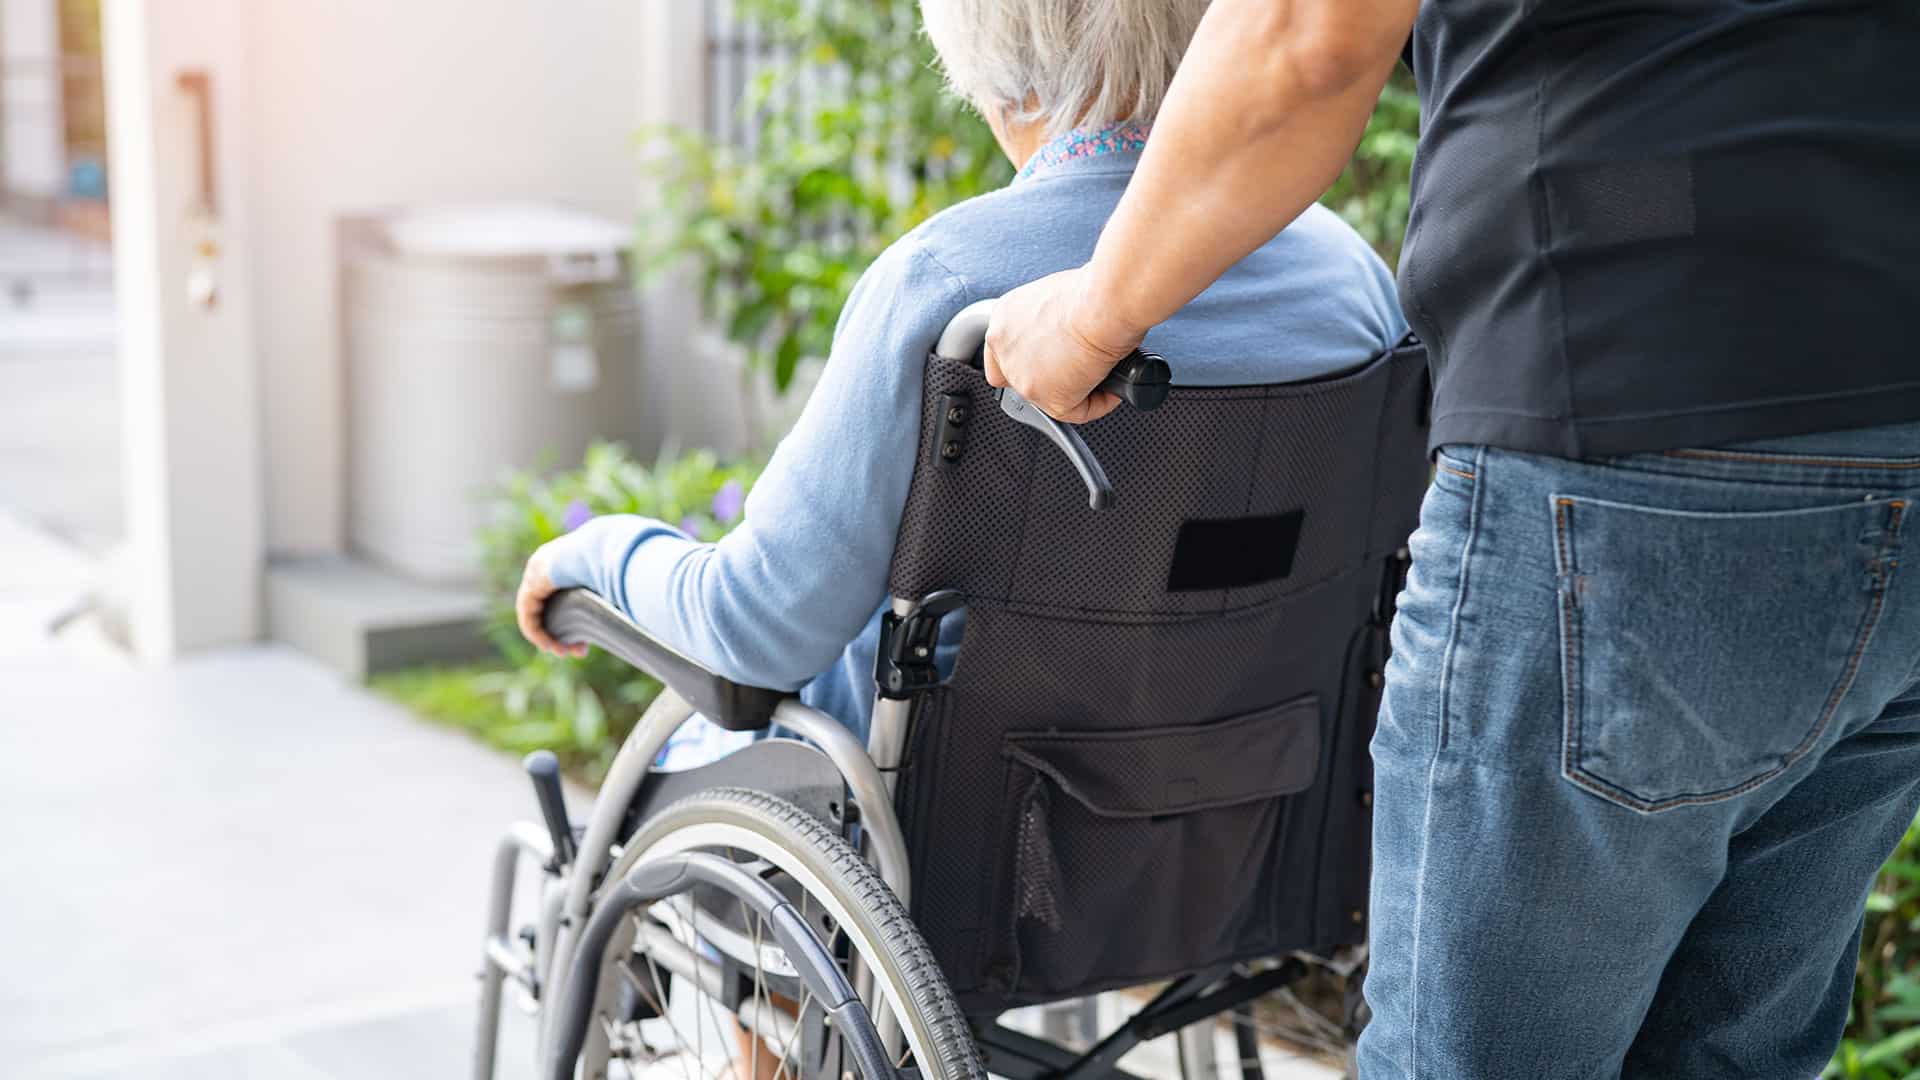 Photograph of an older adult in a wheelchair being carried by their caregiver.